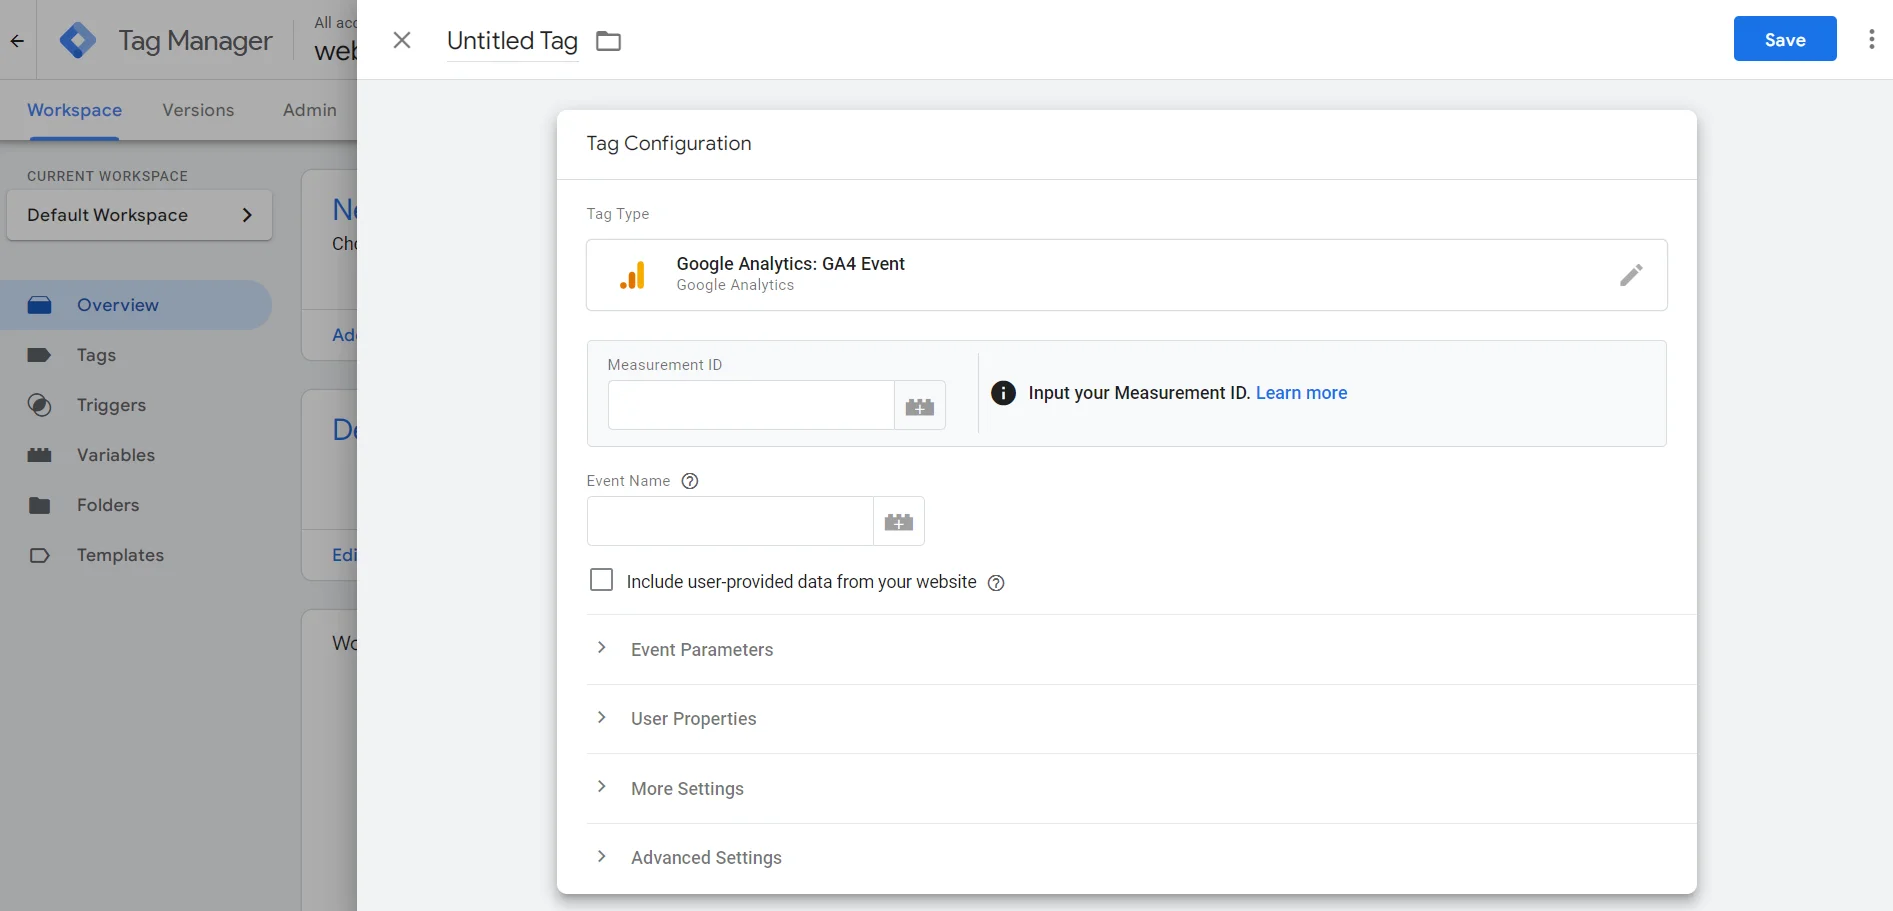 How to add your events to Google Analytics 4 via Google Tag Manager